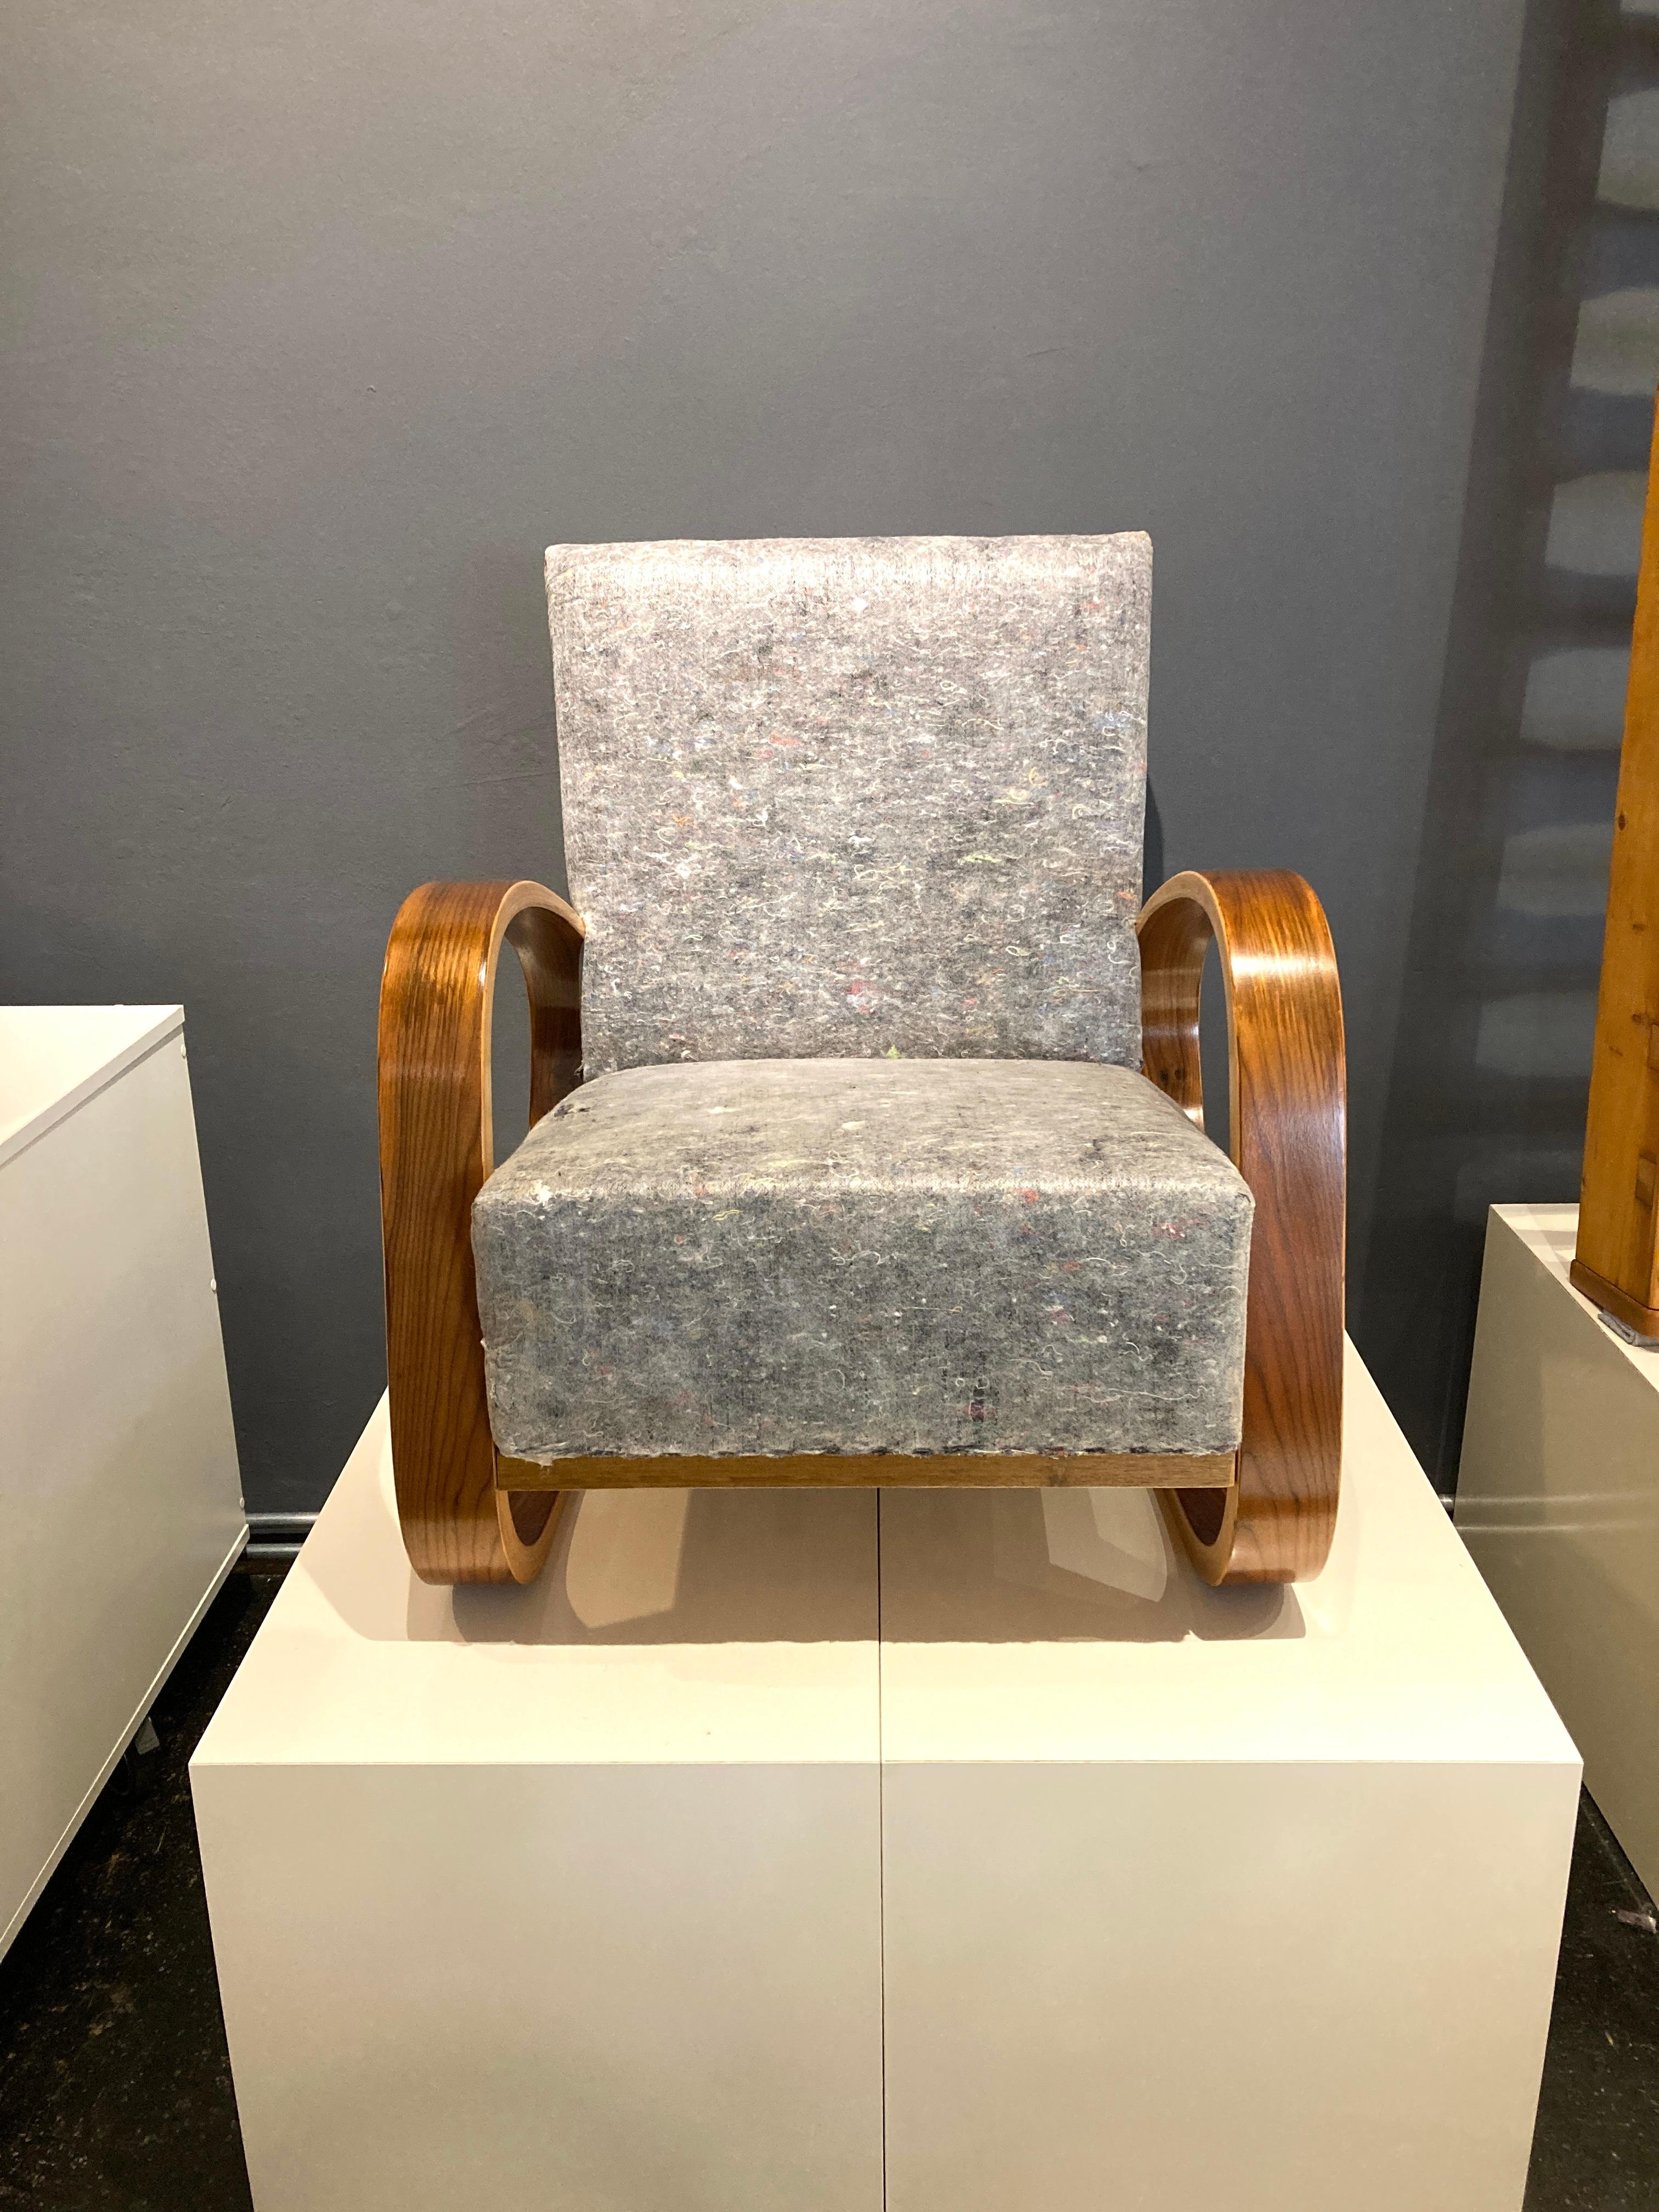 This well-known cantilever armchair by Miroslav Navratil from the 1960s has been completely restored 
and is now waiting for it's new owner to choose his favorite fabric. The armrests are laminated and veneered
with Caucasian walnut and have been